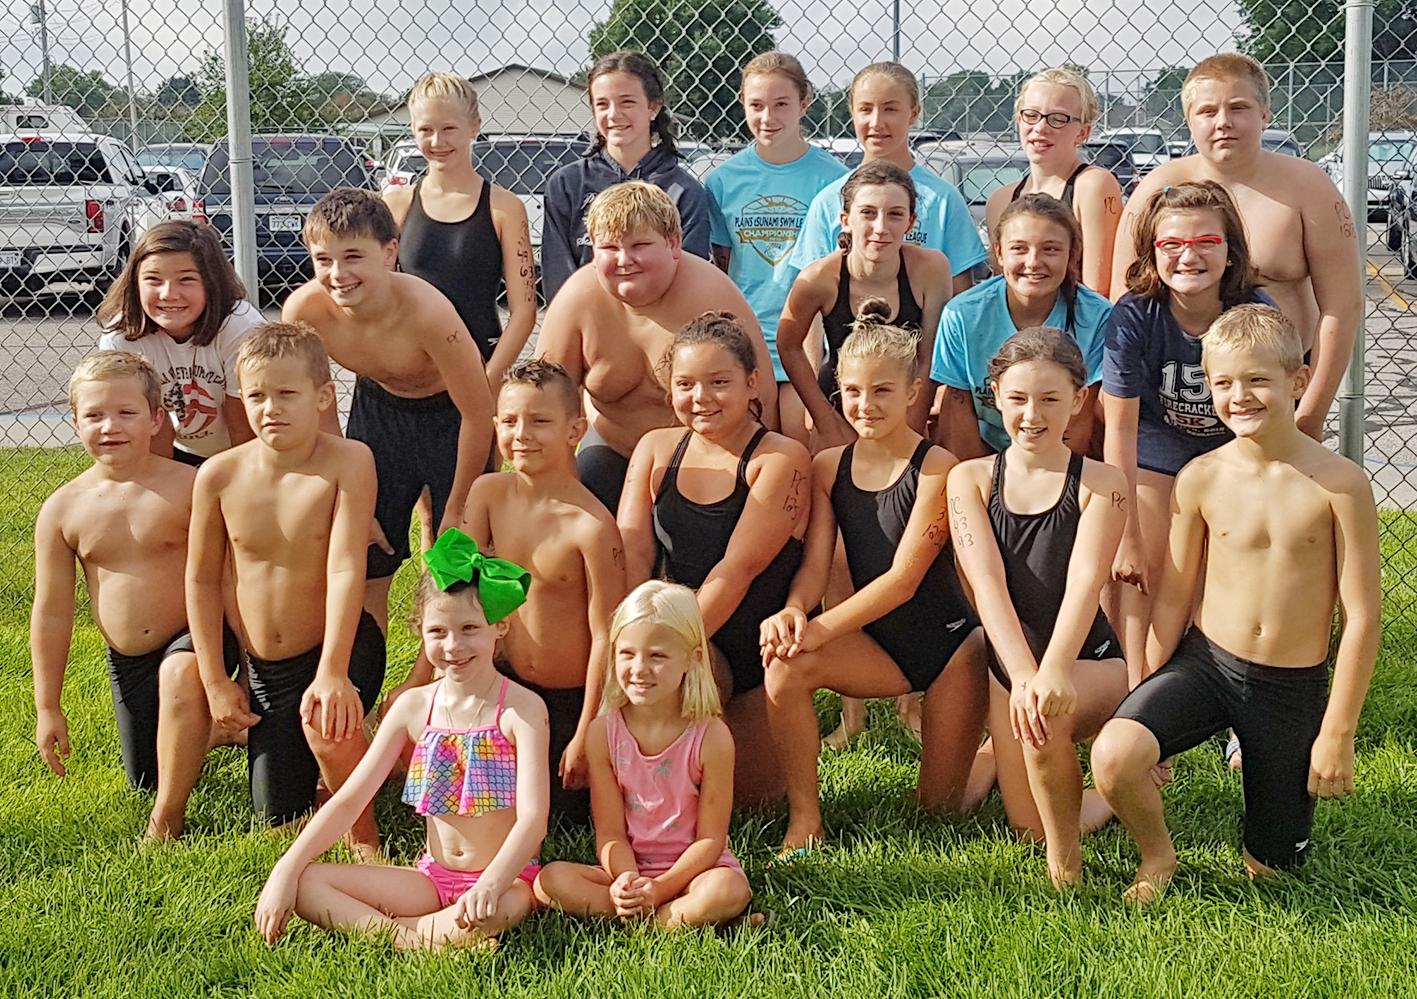 Several members of the Perkins County swim team finished their season at th...